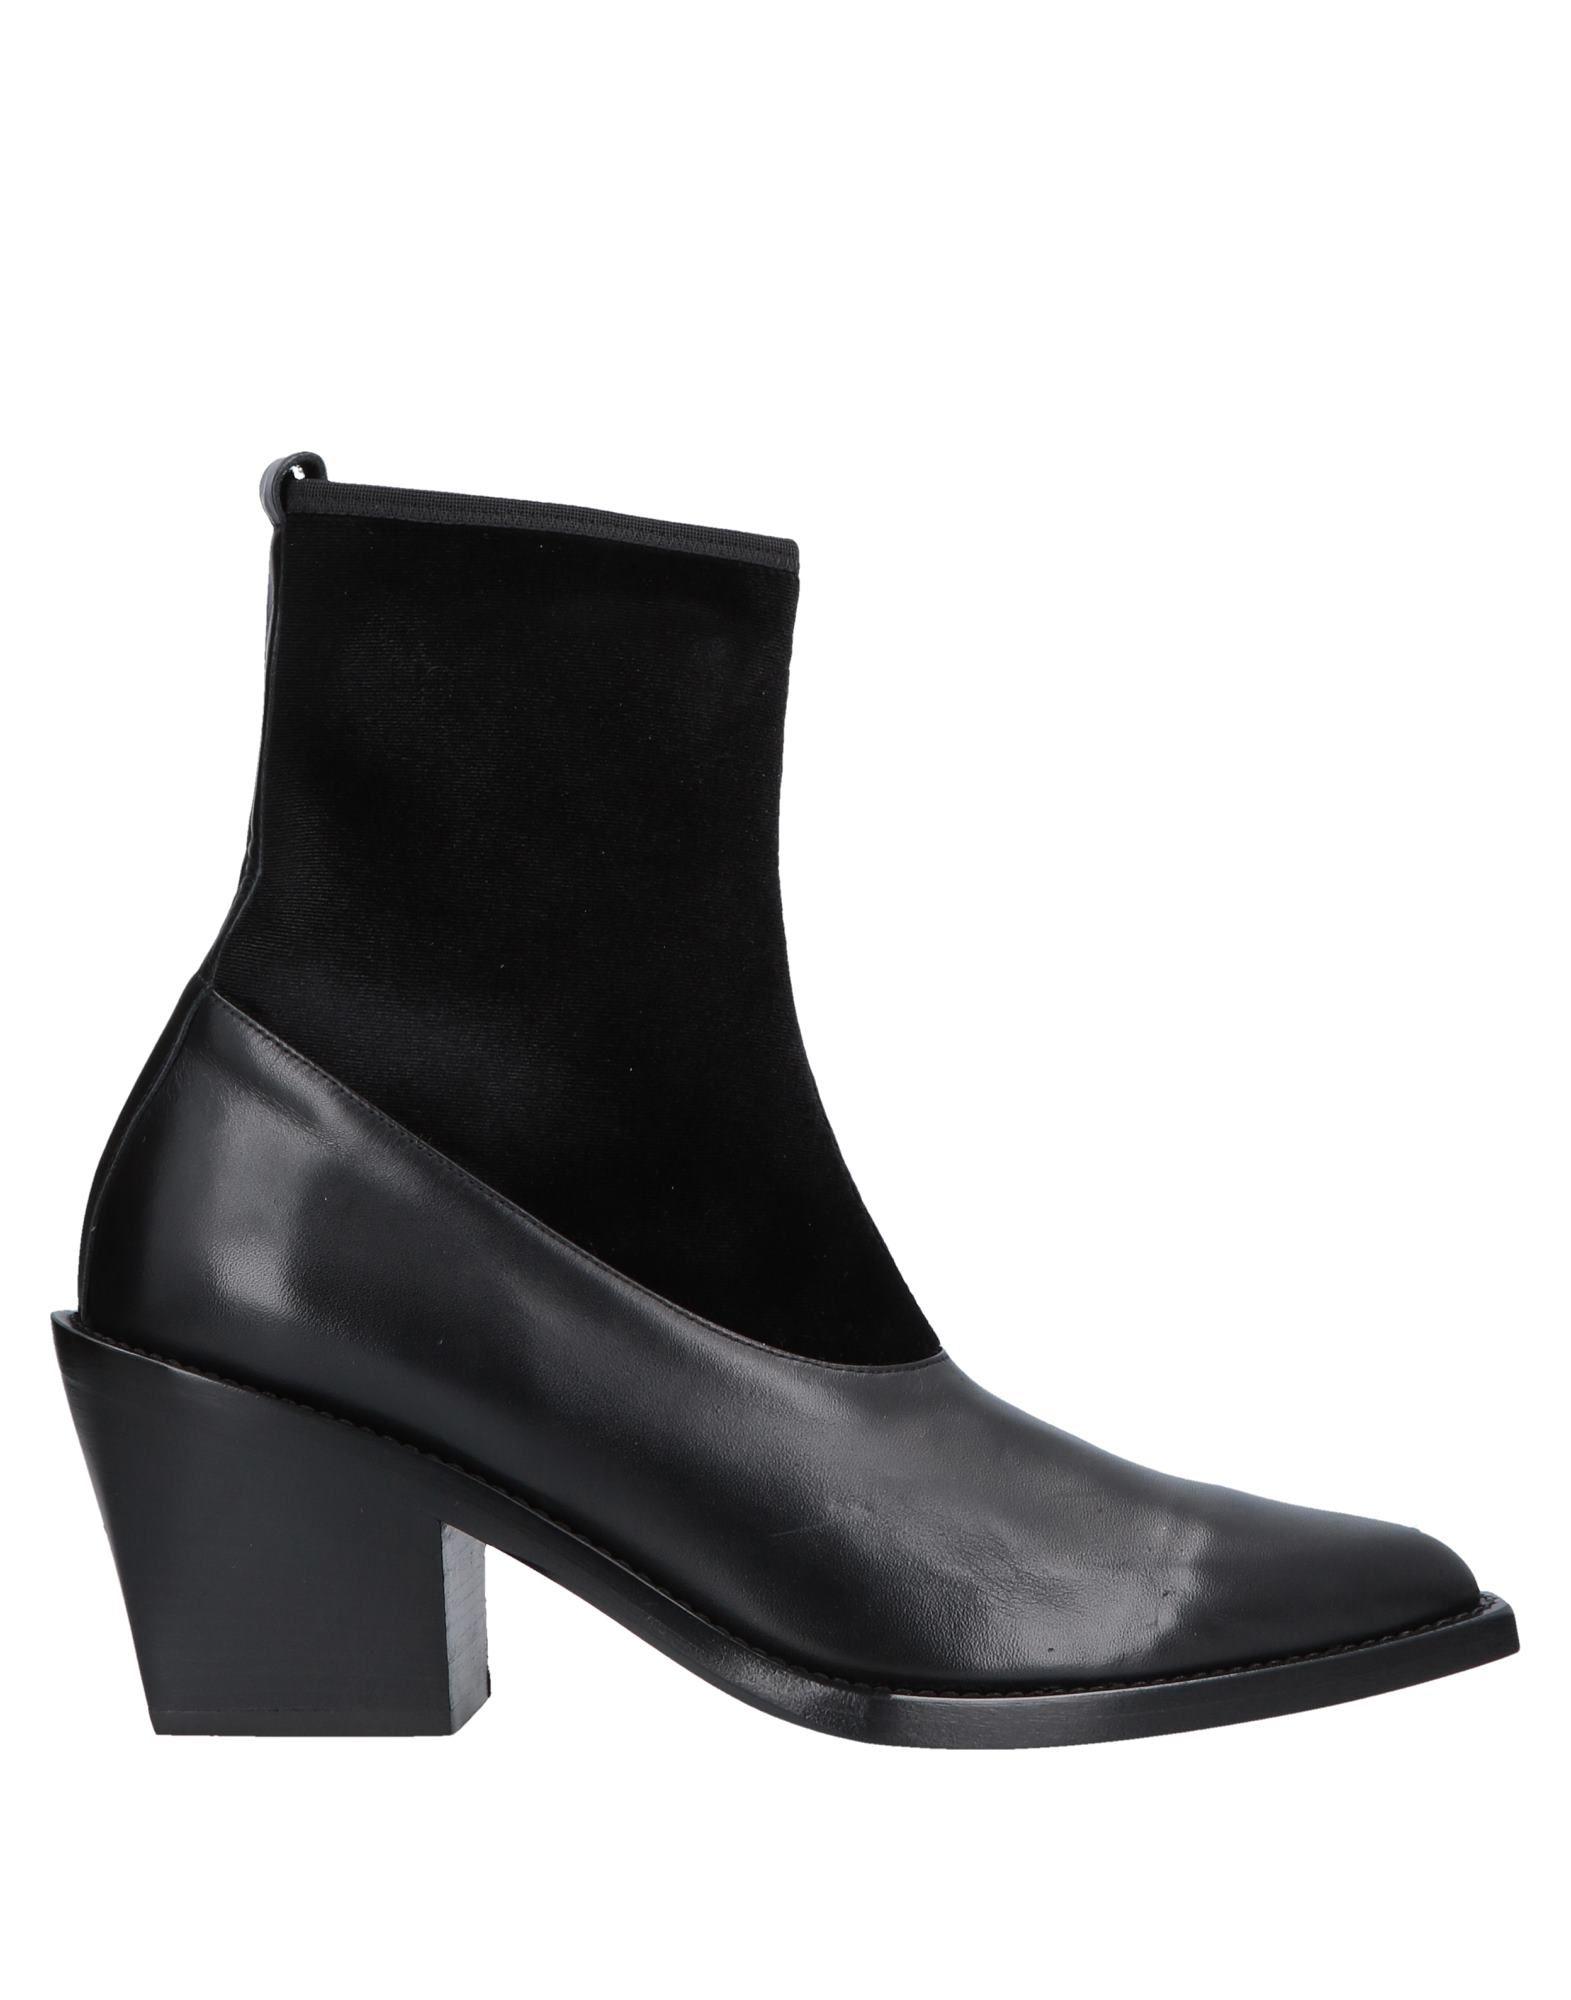 Just Cavalli Ankle Boots in Black - Lyst